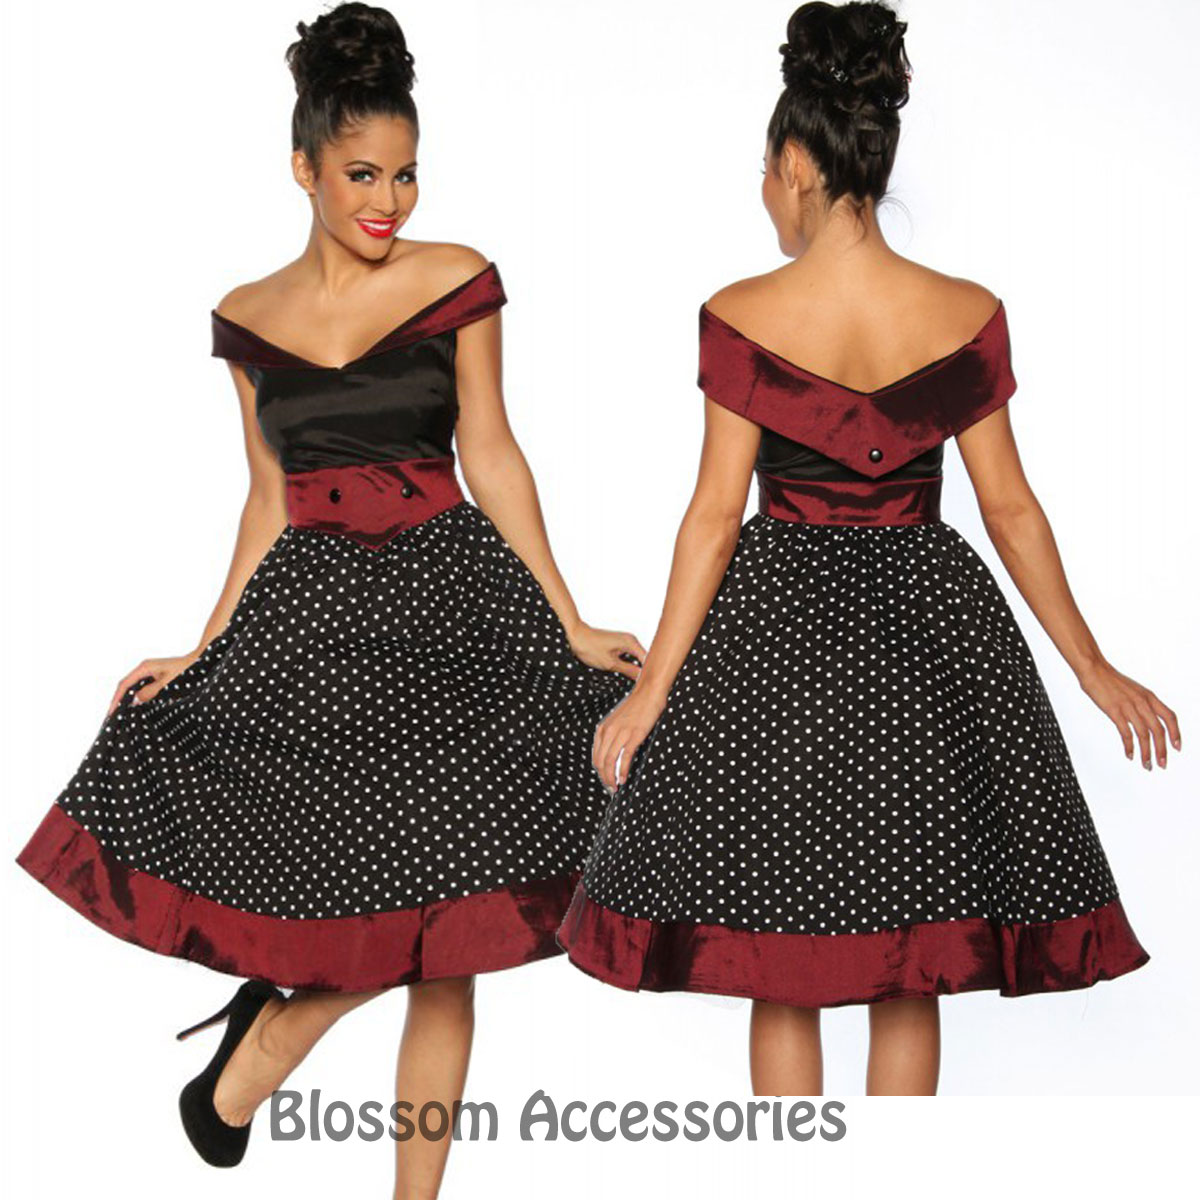 Rk70 Rockabilly 50s 60s Pin Up Cocktail Party Evening Retro Swing Dance Dress Ebay 